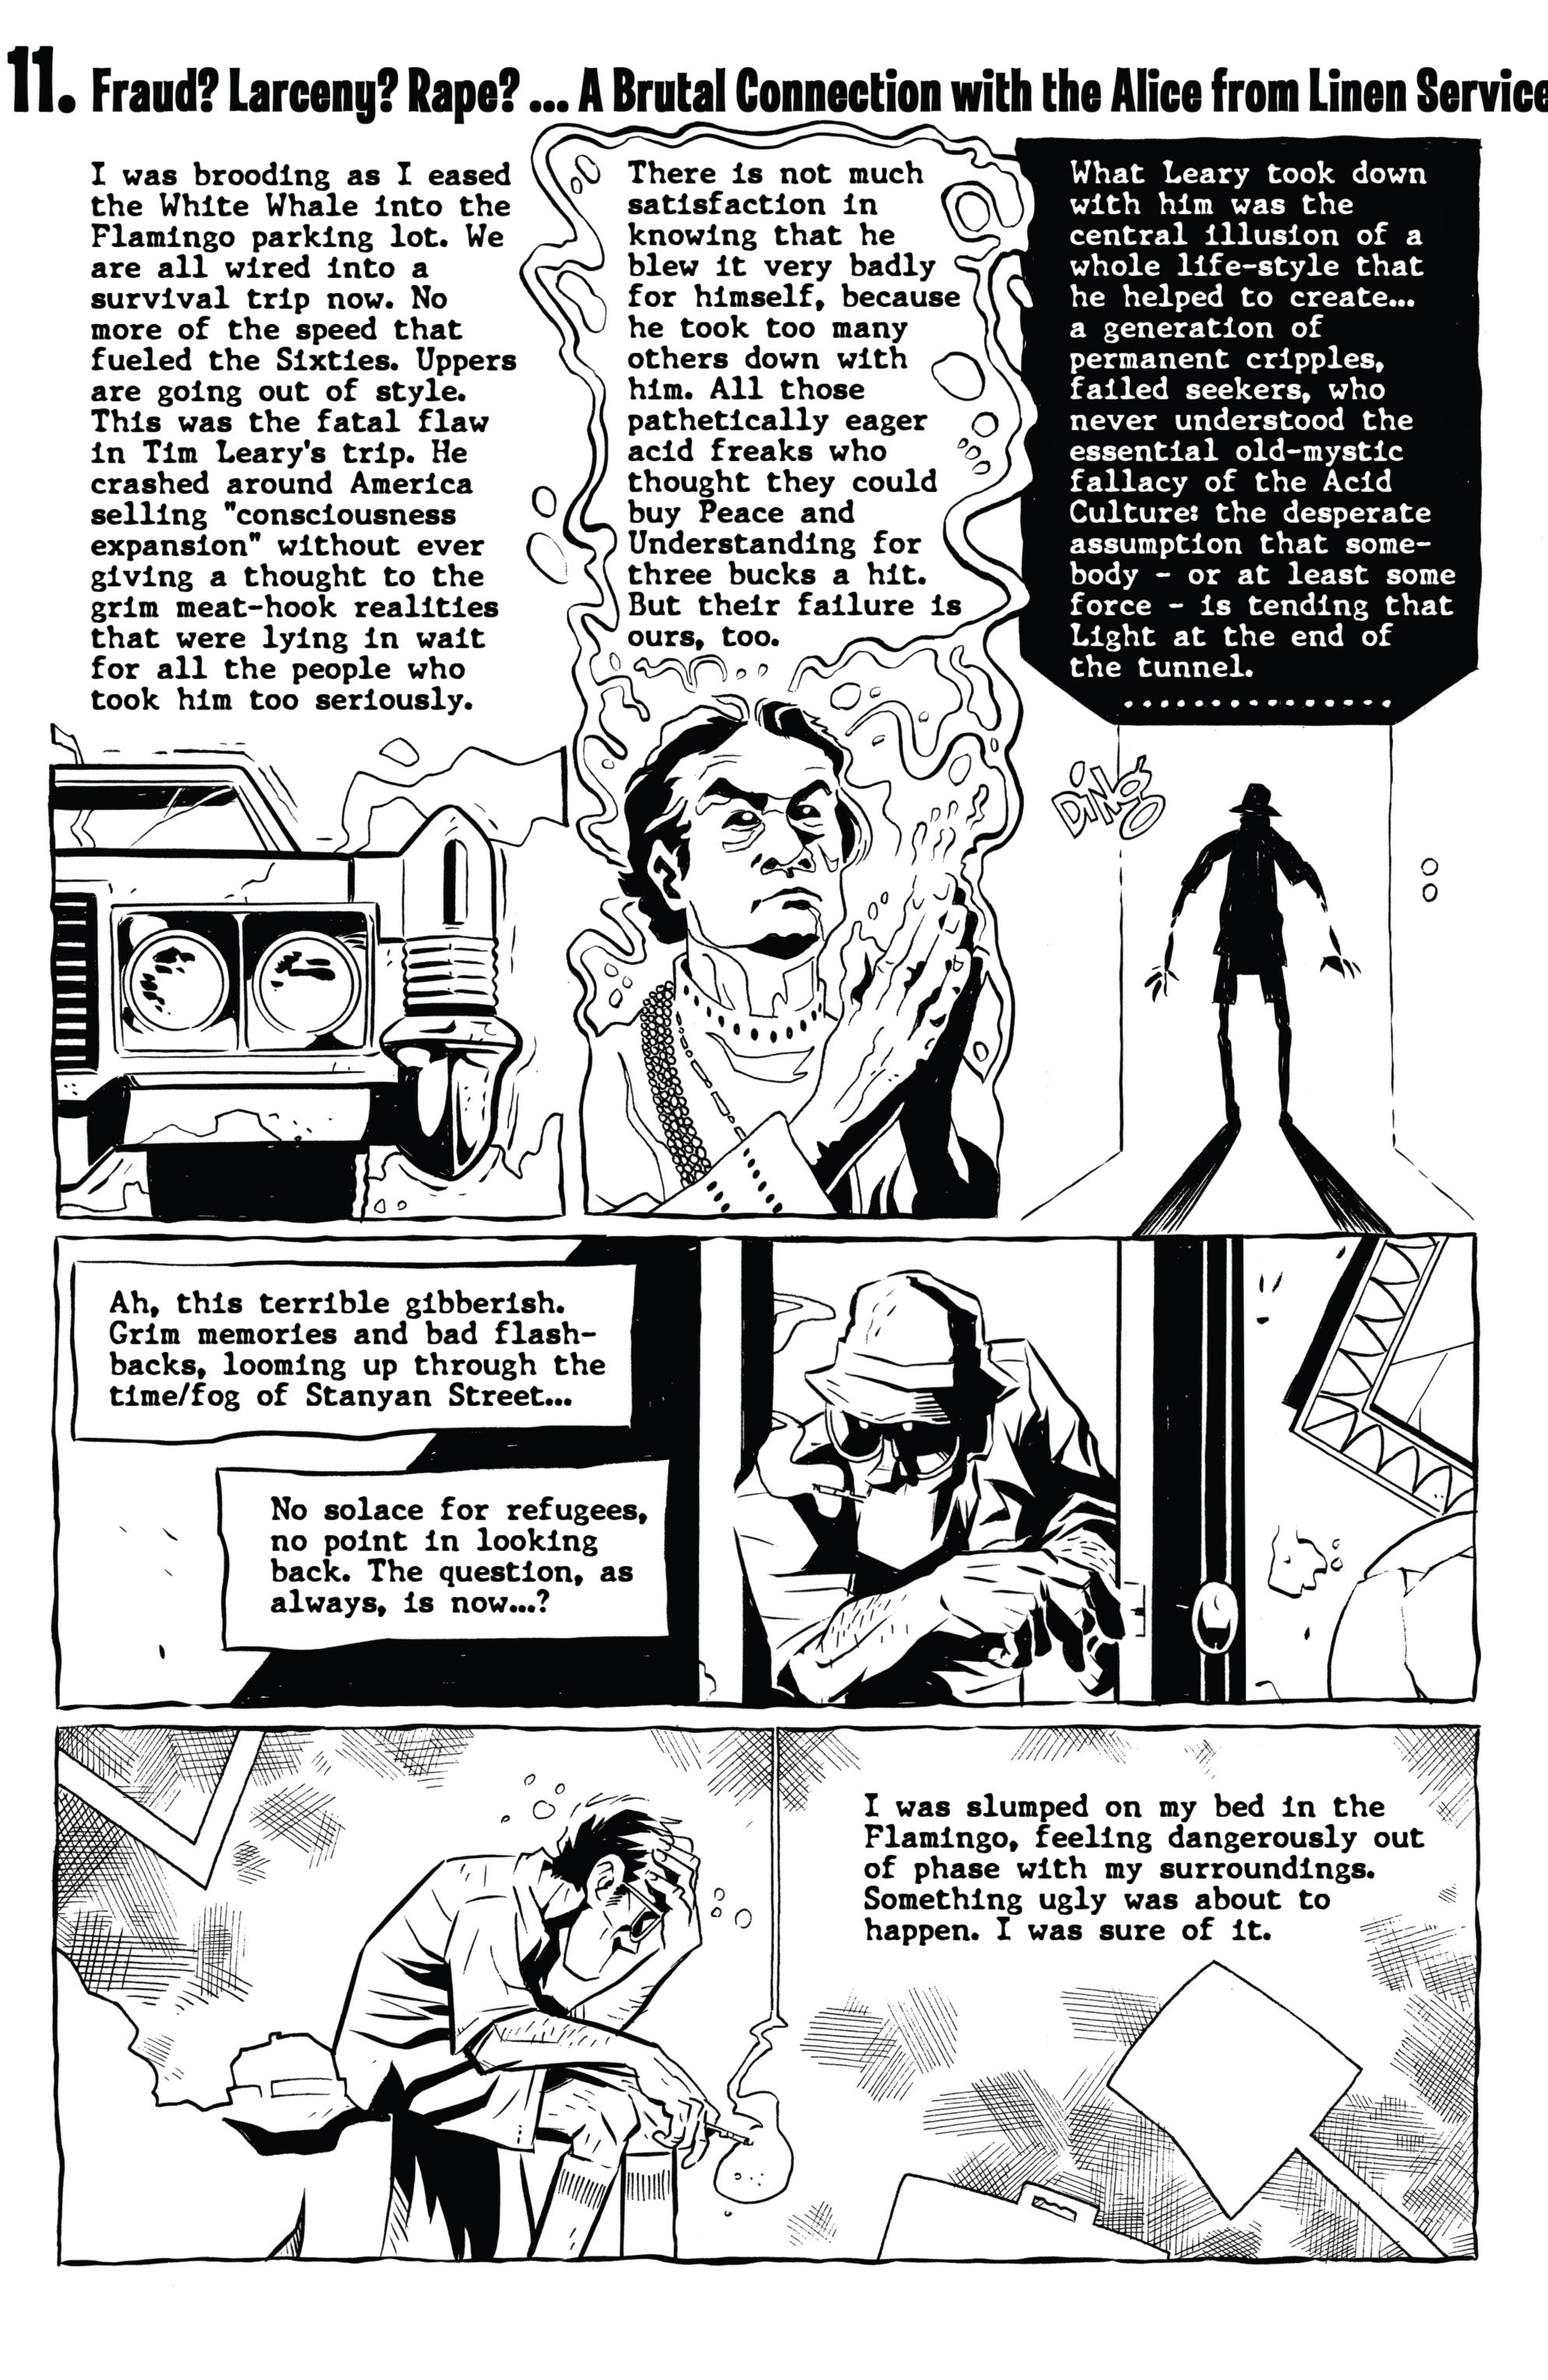 Read online Hunter S. Thompson's Fear and Loathing in Las Vegas comic -  Issue #4 - 27